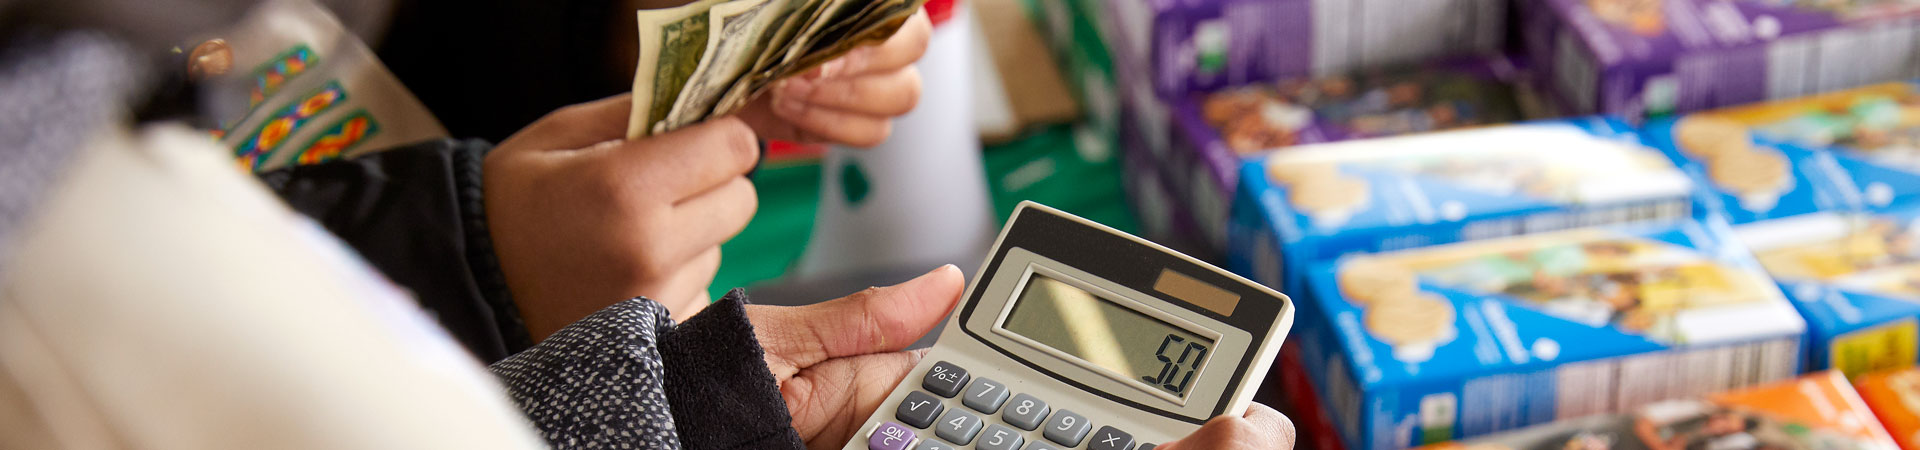  A person's hands are holding a calculator while the hands of another person counts money. There is a table stacked with boxes of Girl Scout Cookies in the background. 